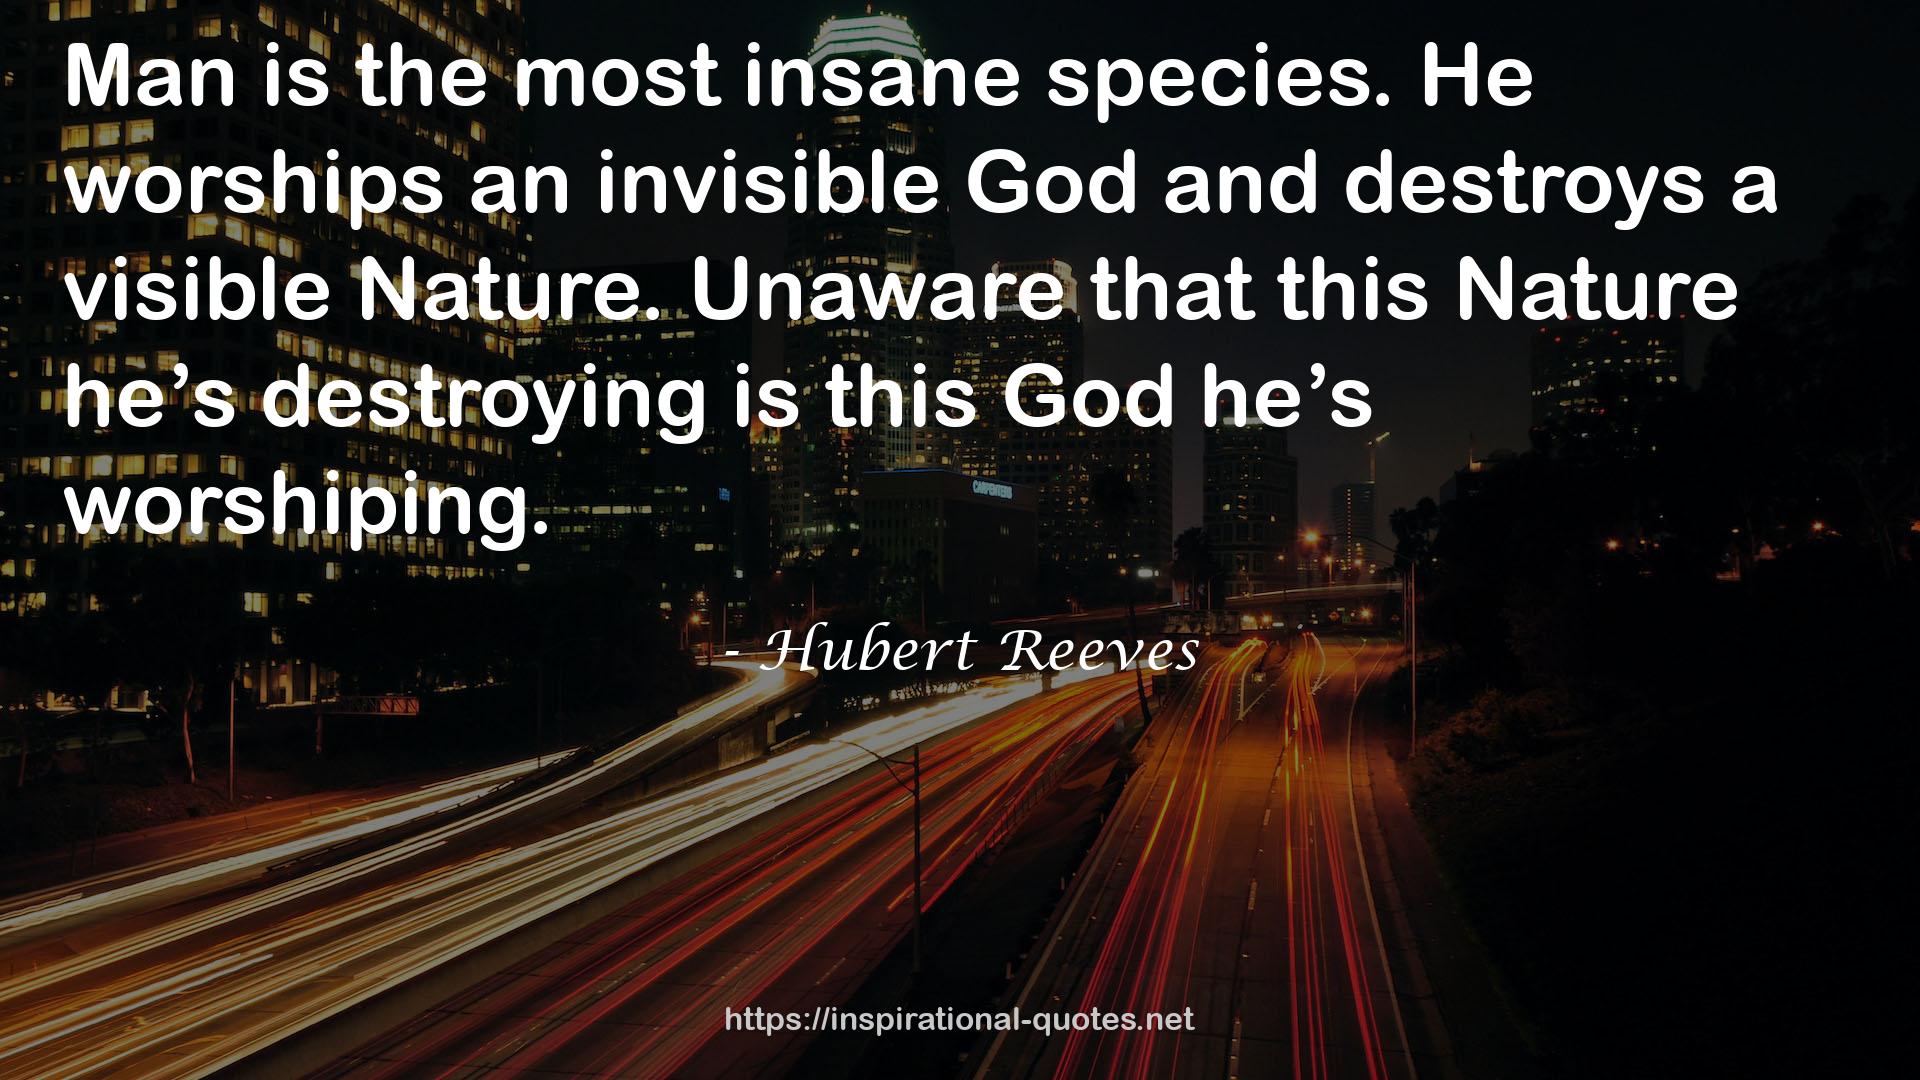 Hubert Reeves QUOTES